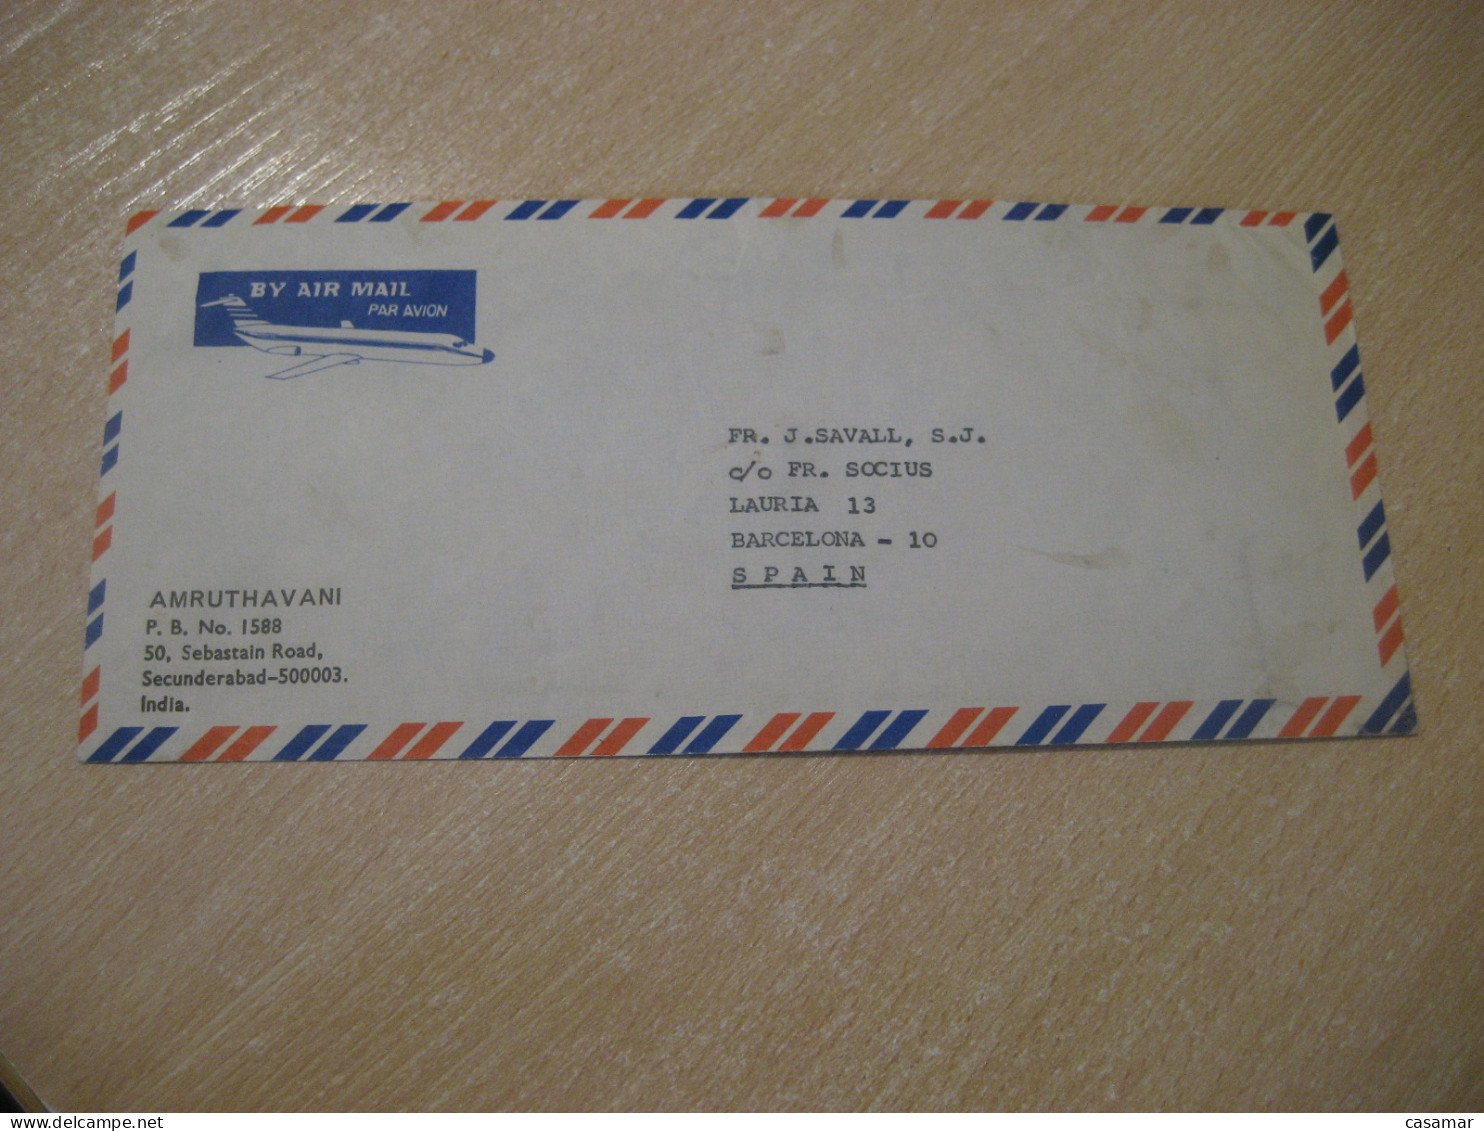 SECUNDERABAD 1977 To Barcelona Spain Phil. Ex. INDIPEX Bloc Peacock Air Mail Cancel Cover INDIA INDE - Covers & Documents